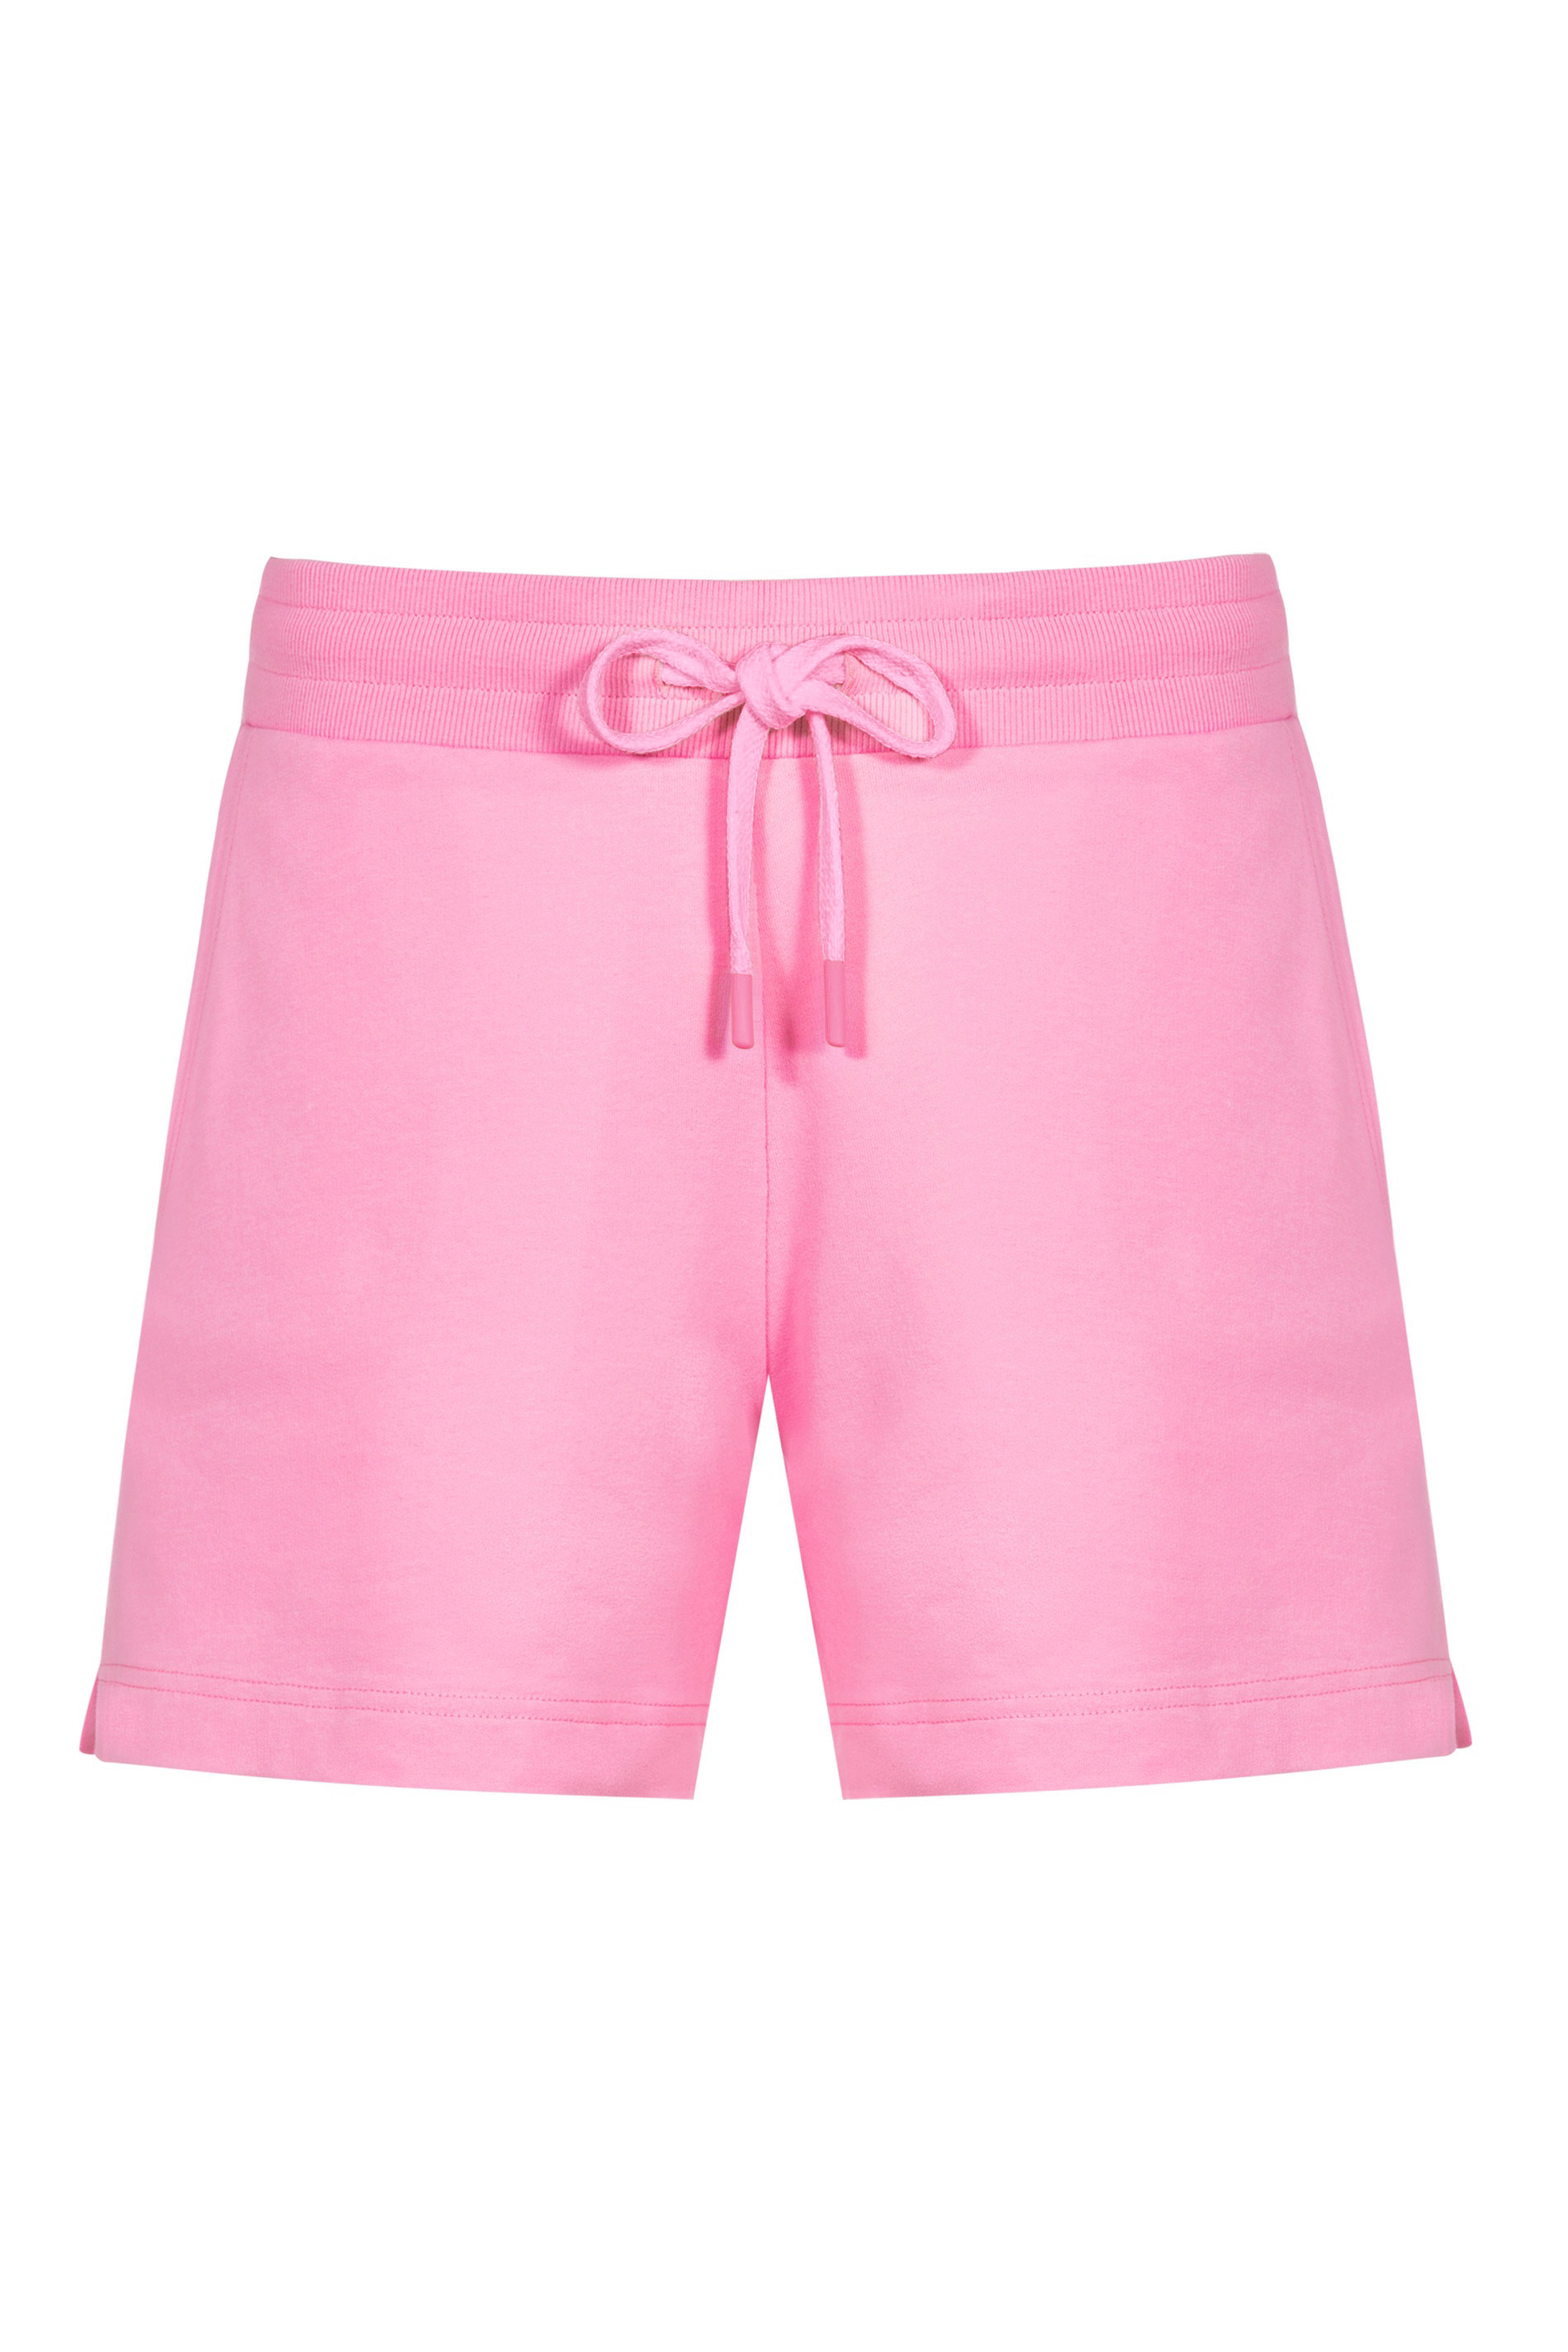 Shorts Serie Erin Uitknippen | mey®